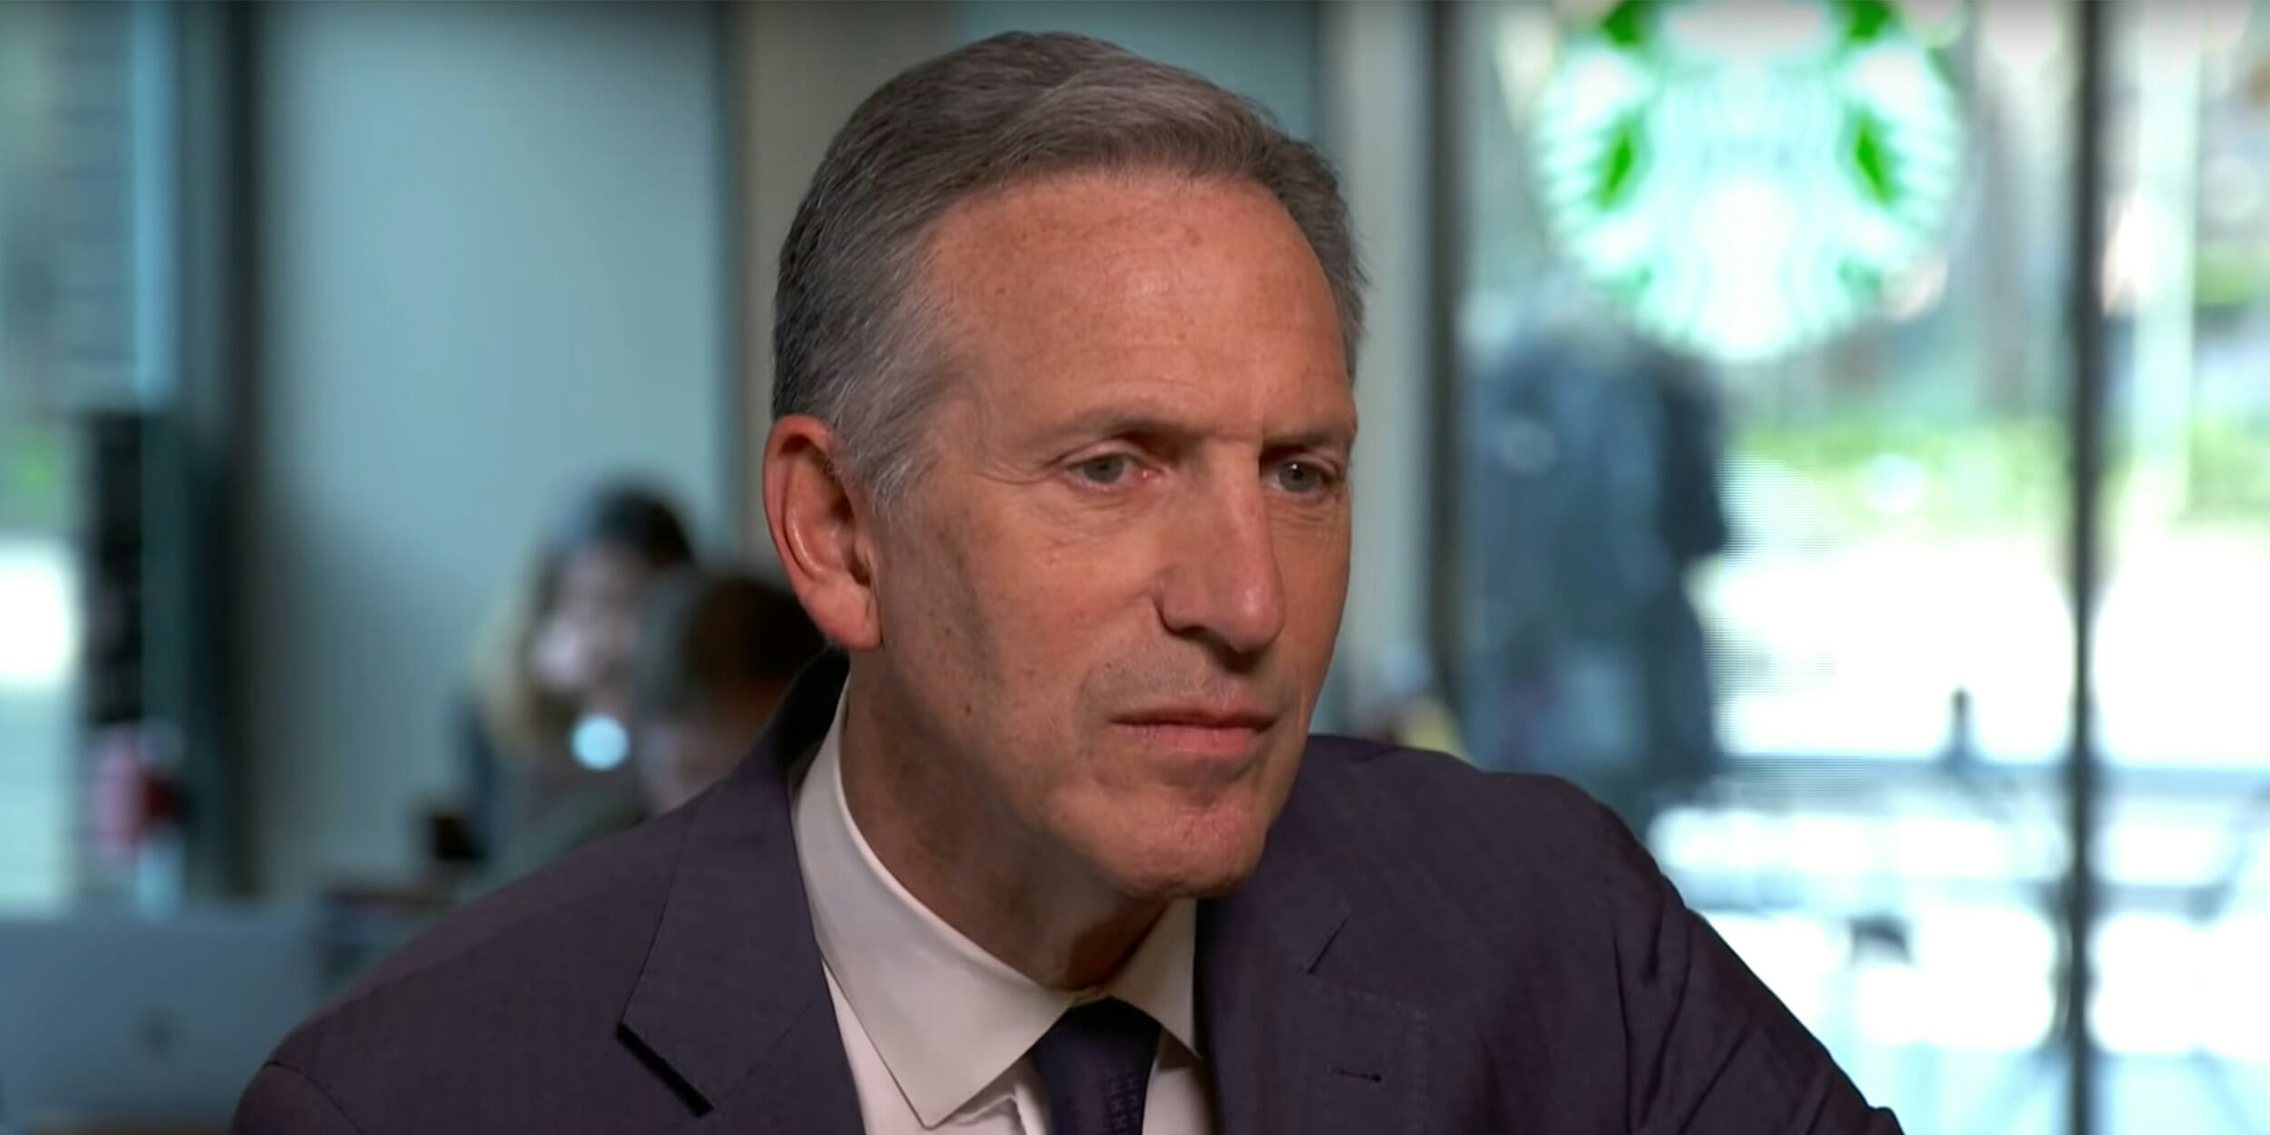 Howard Shultz picture from interview.